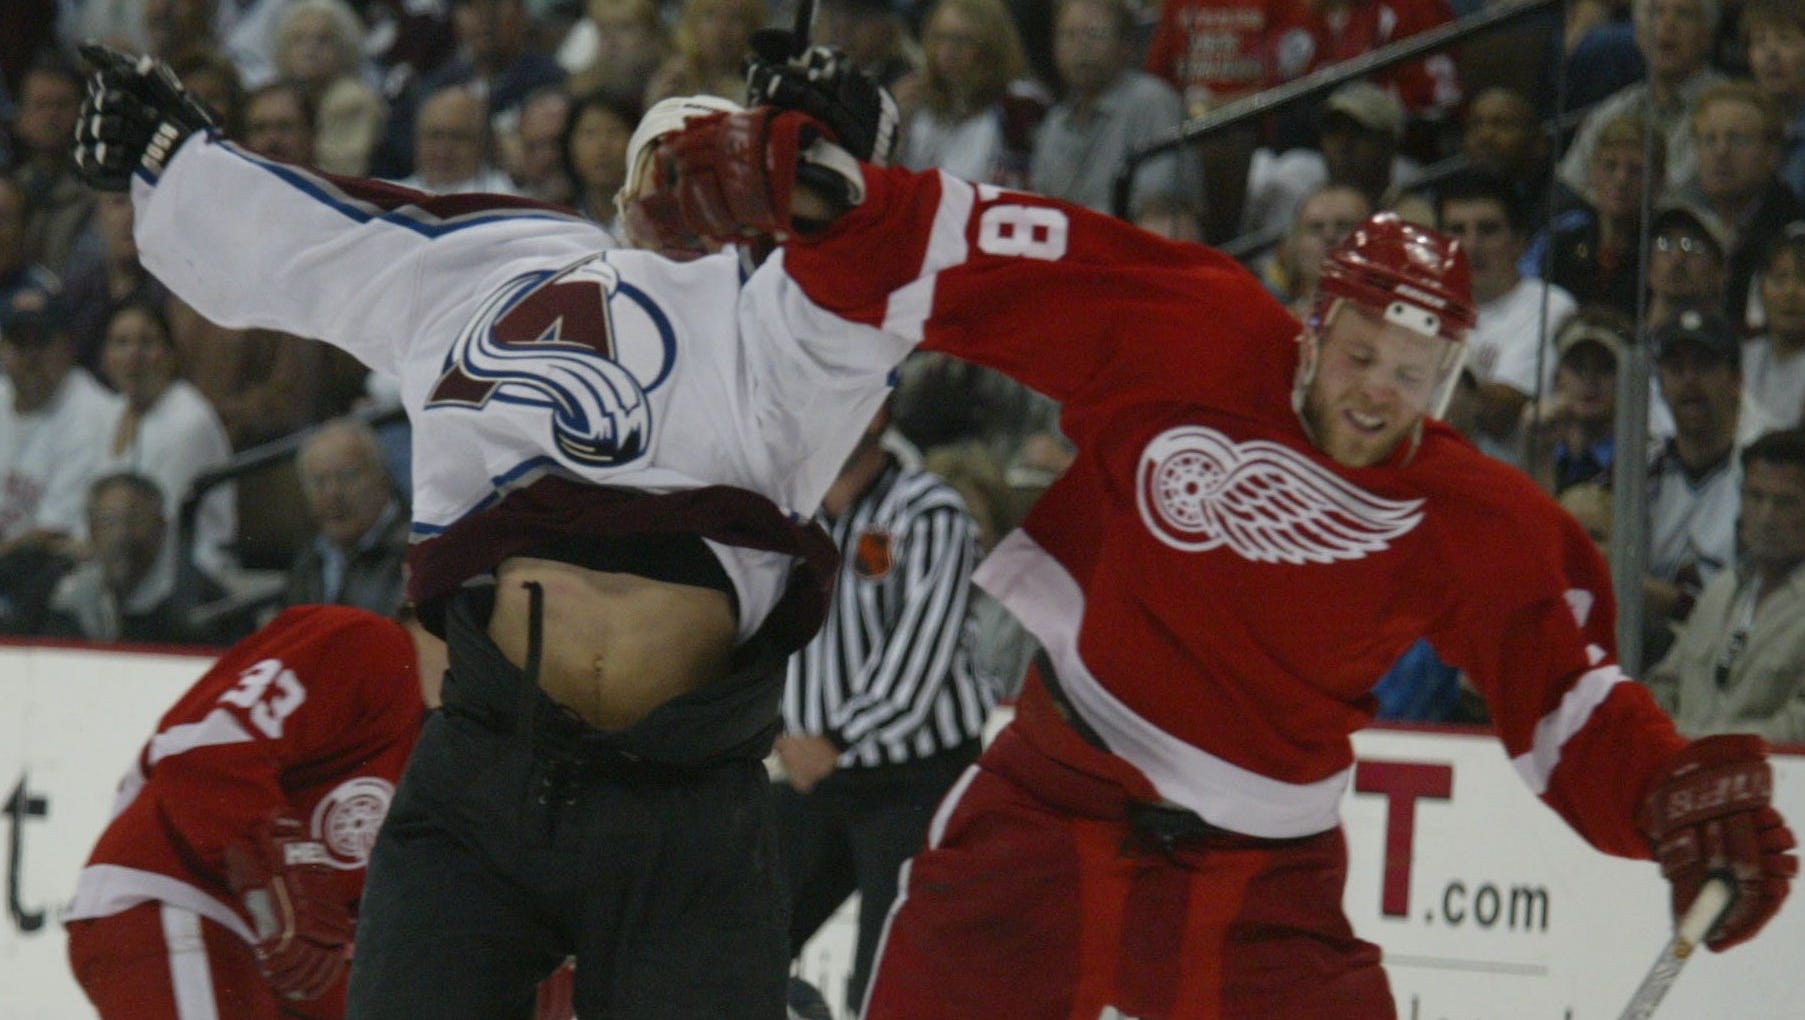 Detroit Red Wings forward Kirk Maltby, right, and Colorado Avalanche forward Dan Hinote collide at the Pepsi Center in Denver on May 22, 2002.